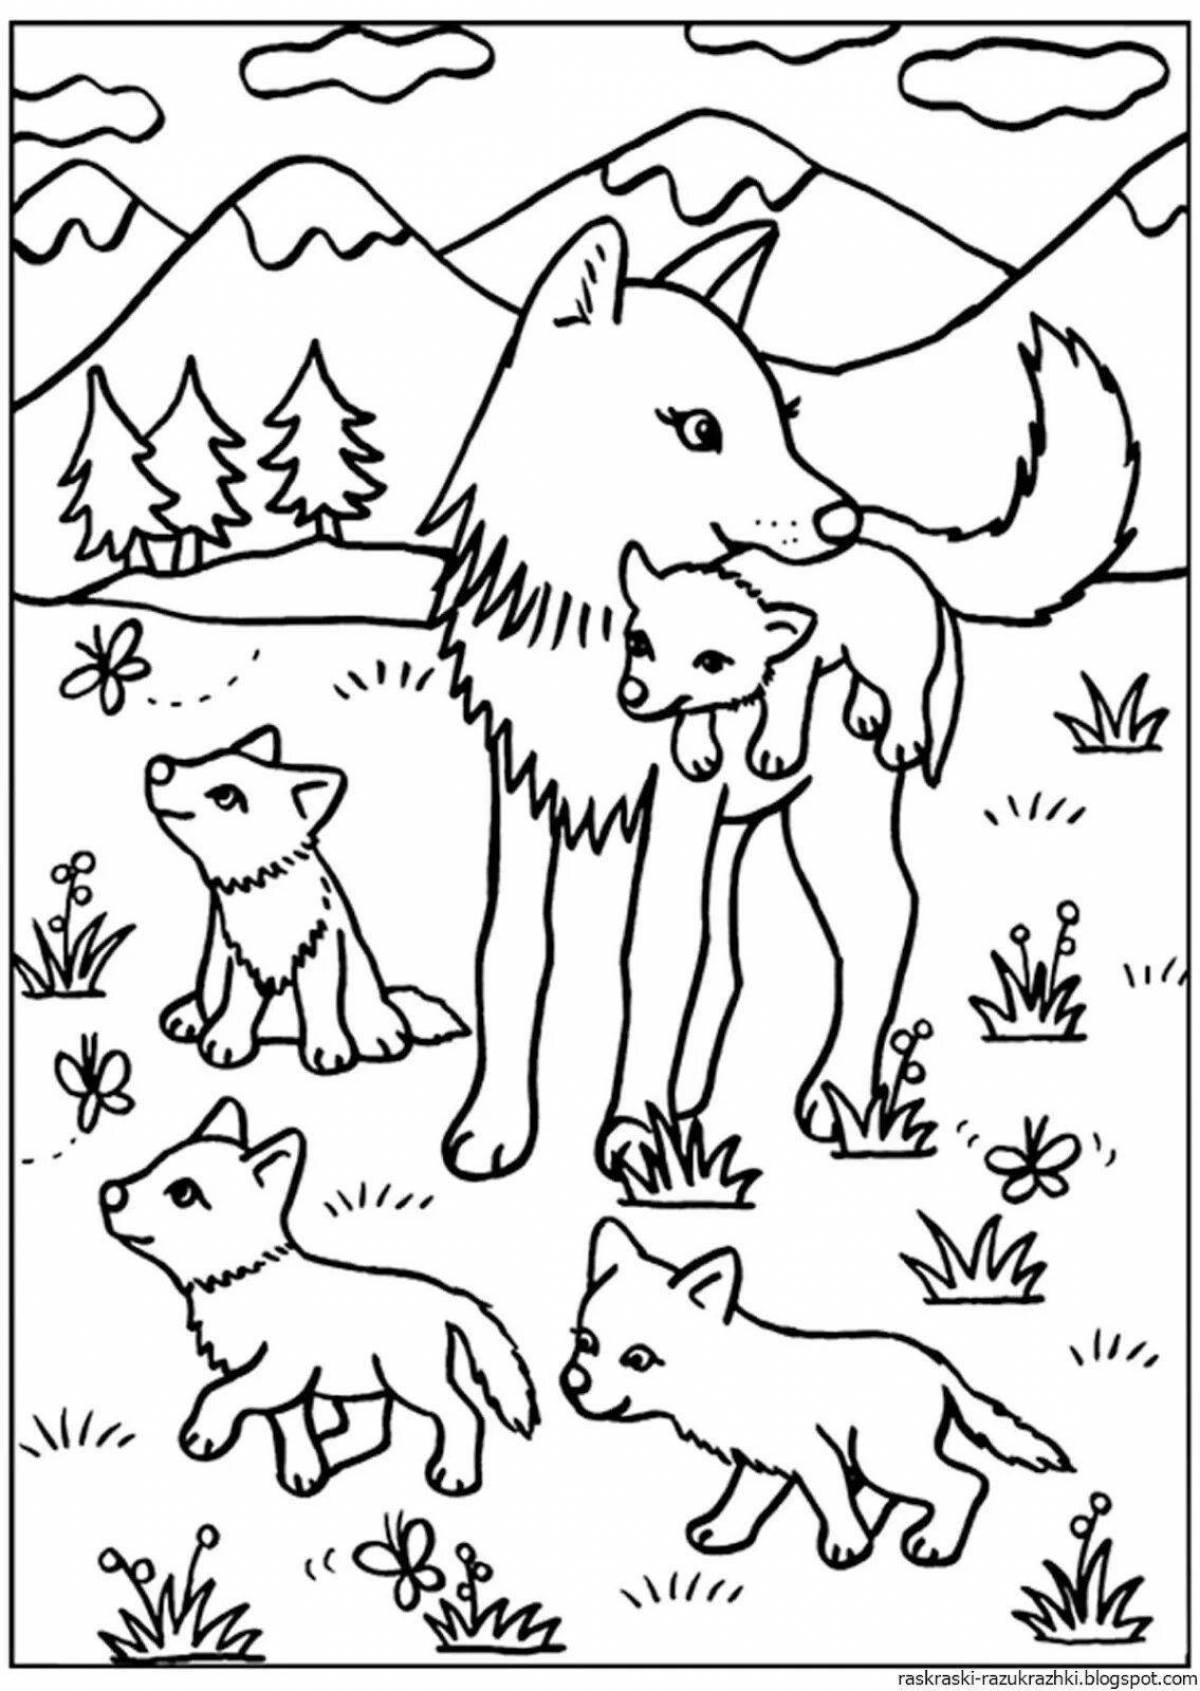 Wonderful forest animal coloring book for 4-5 year olds